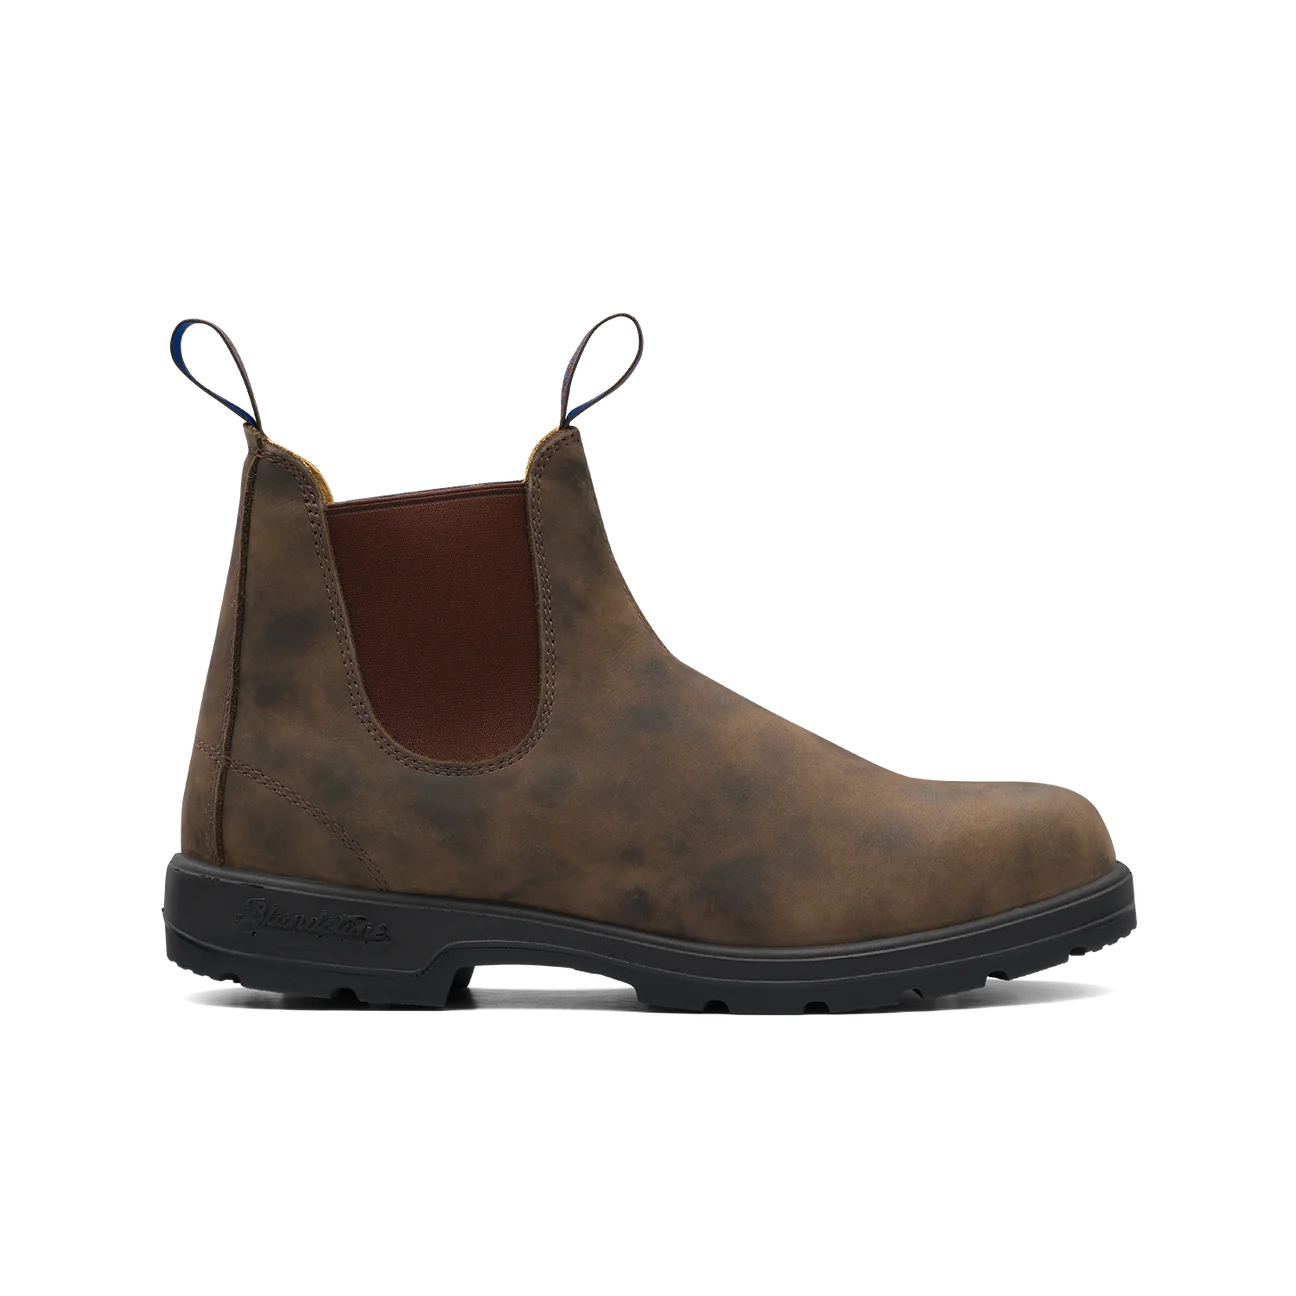 Blundstone 584 Winter Thermal Classic Boots